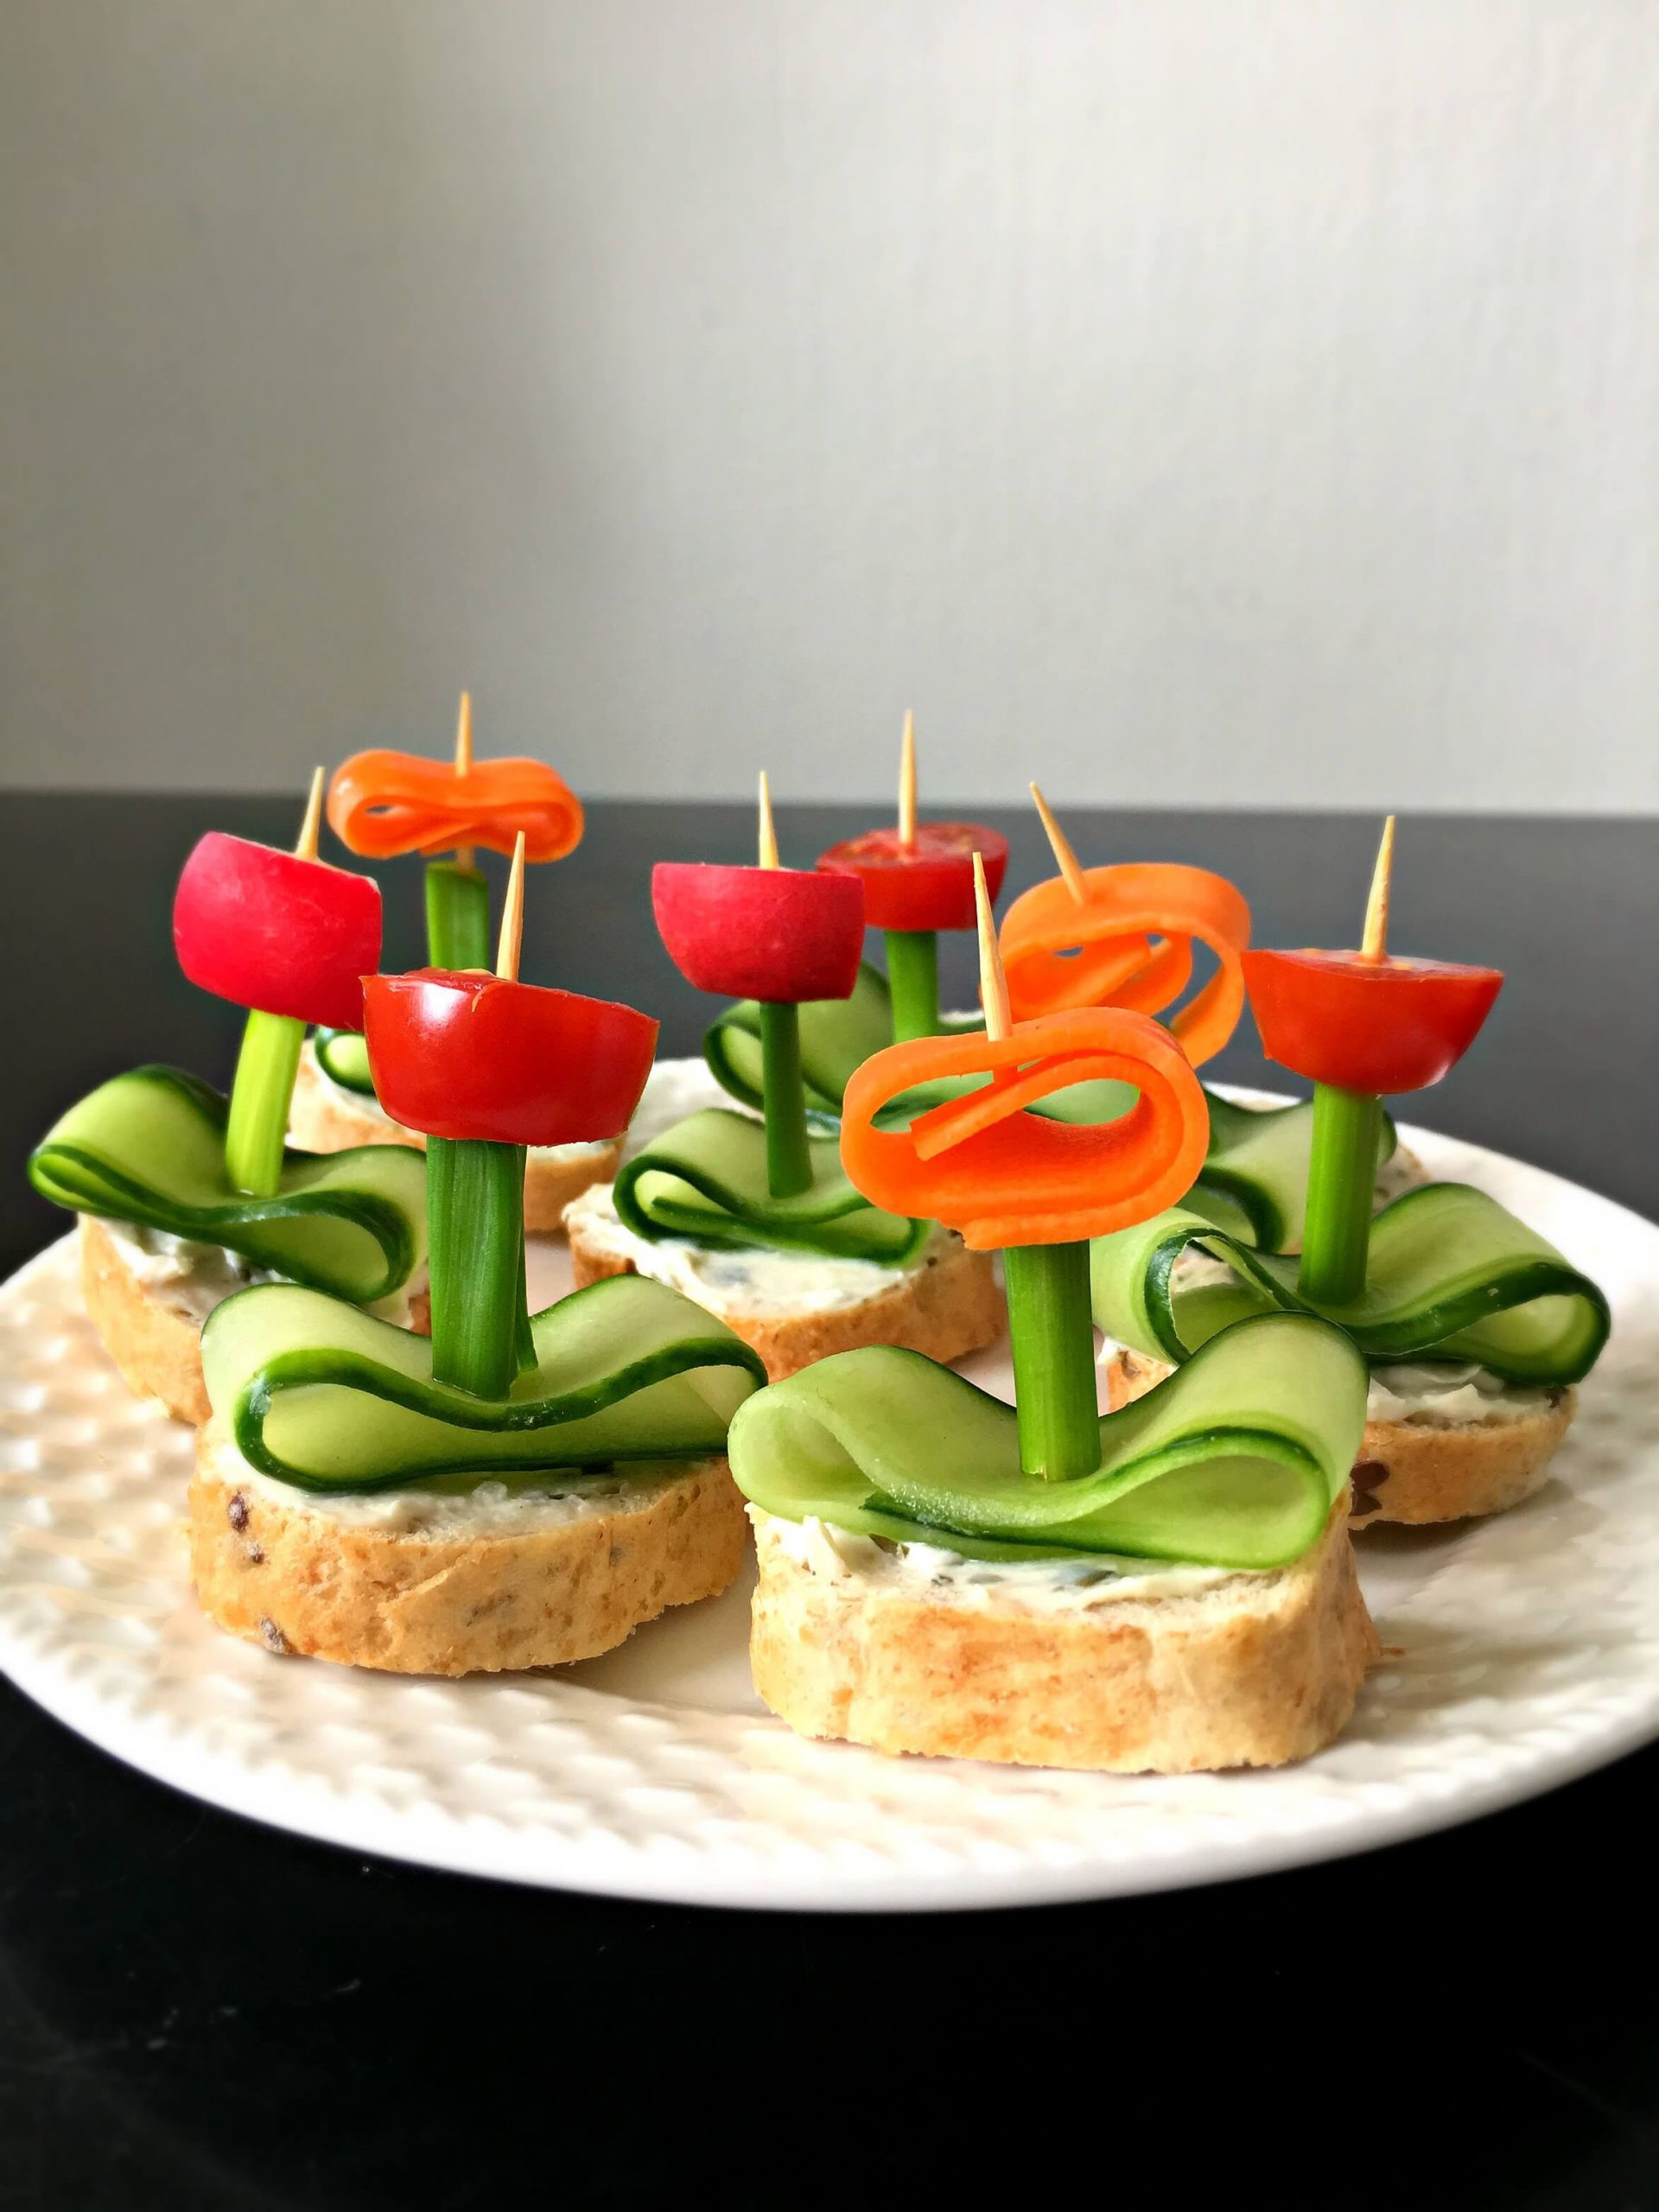 Best Vegetarian Appetizers
 Vegan Flower Appetizers with Herb "Cream Cheese"